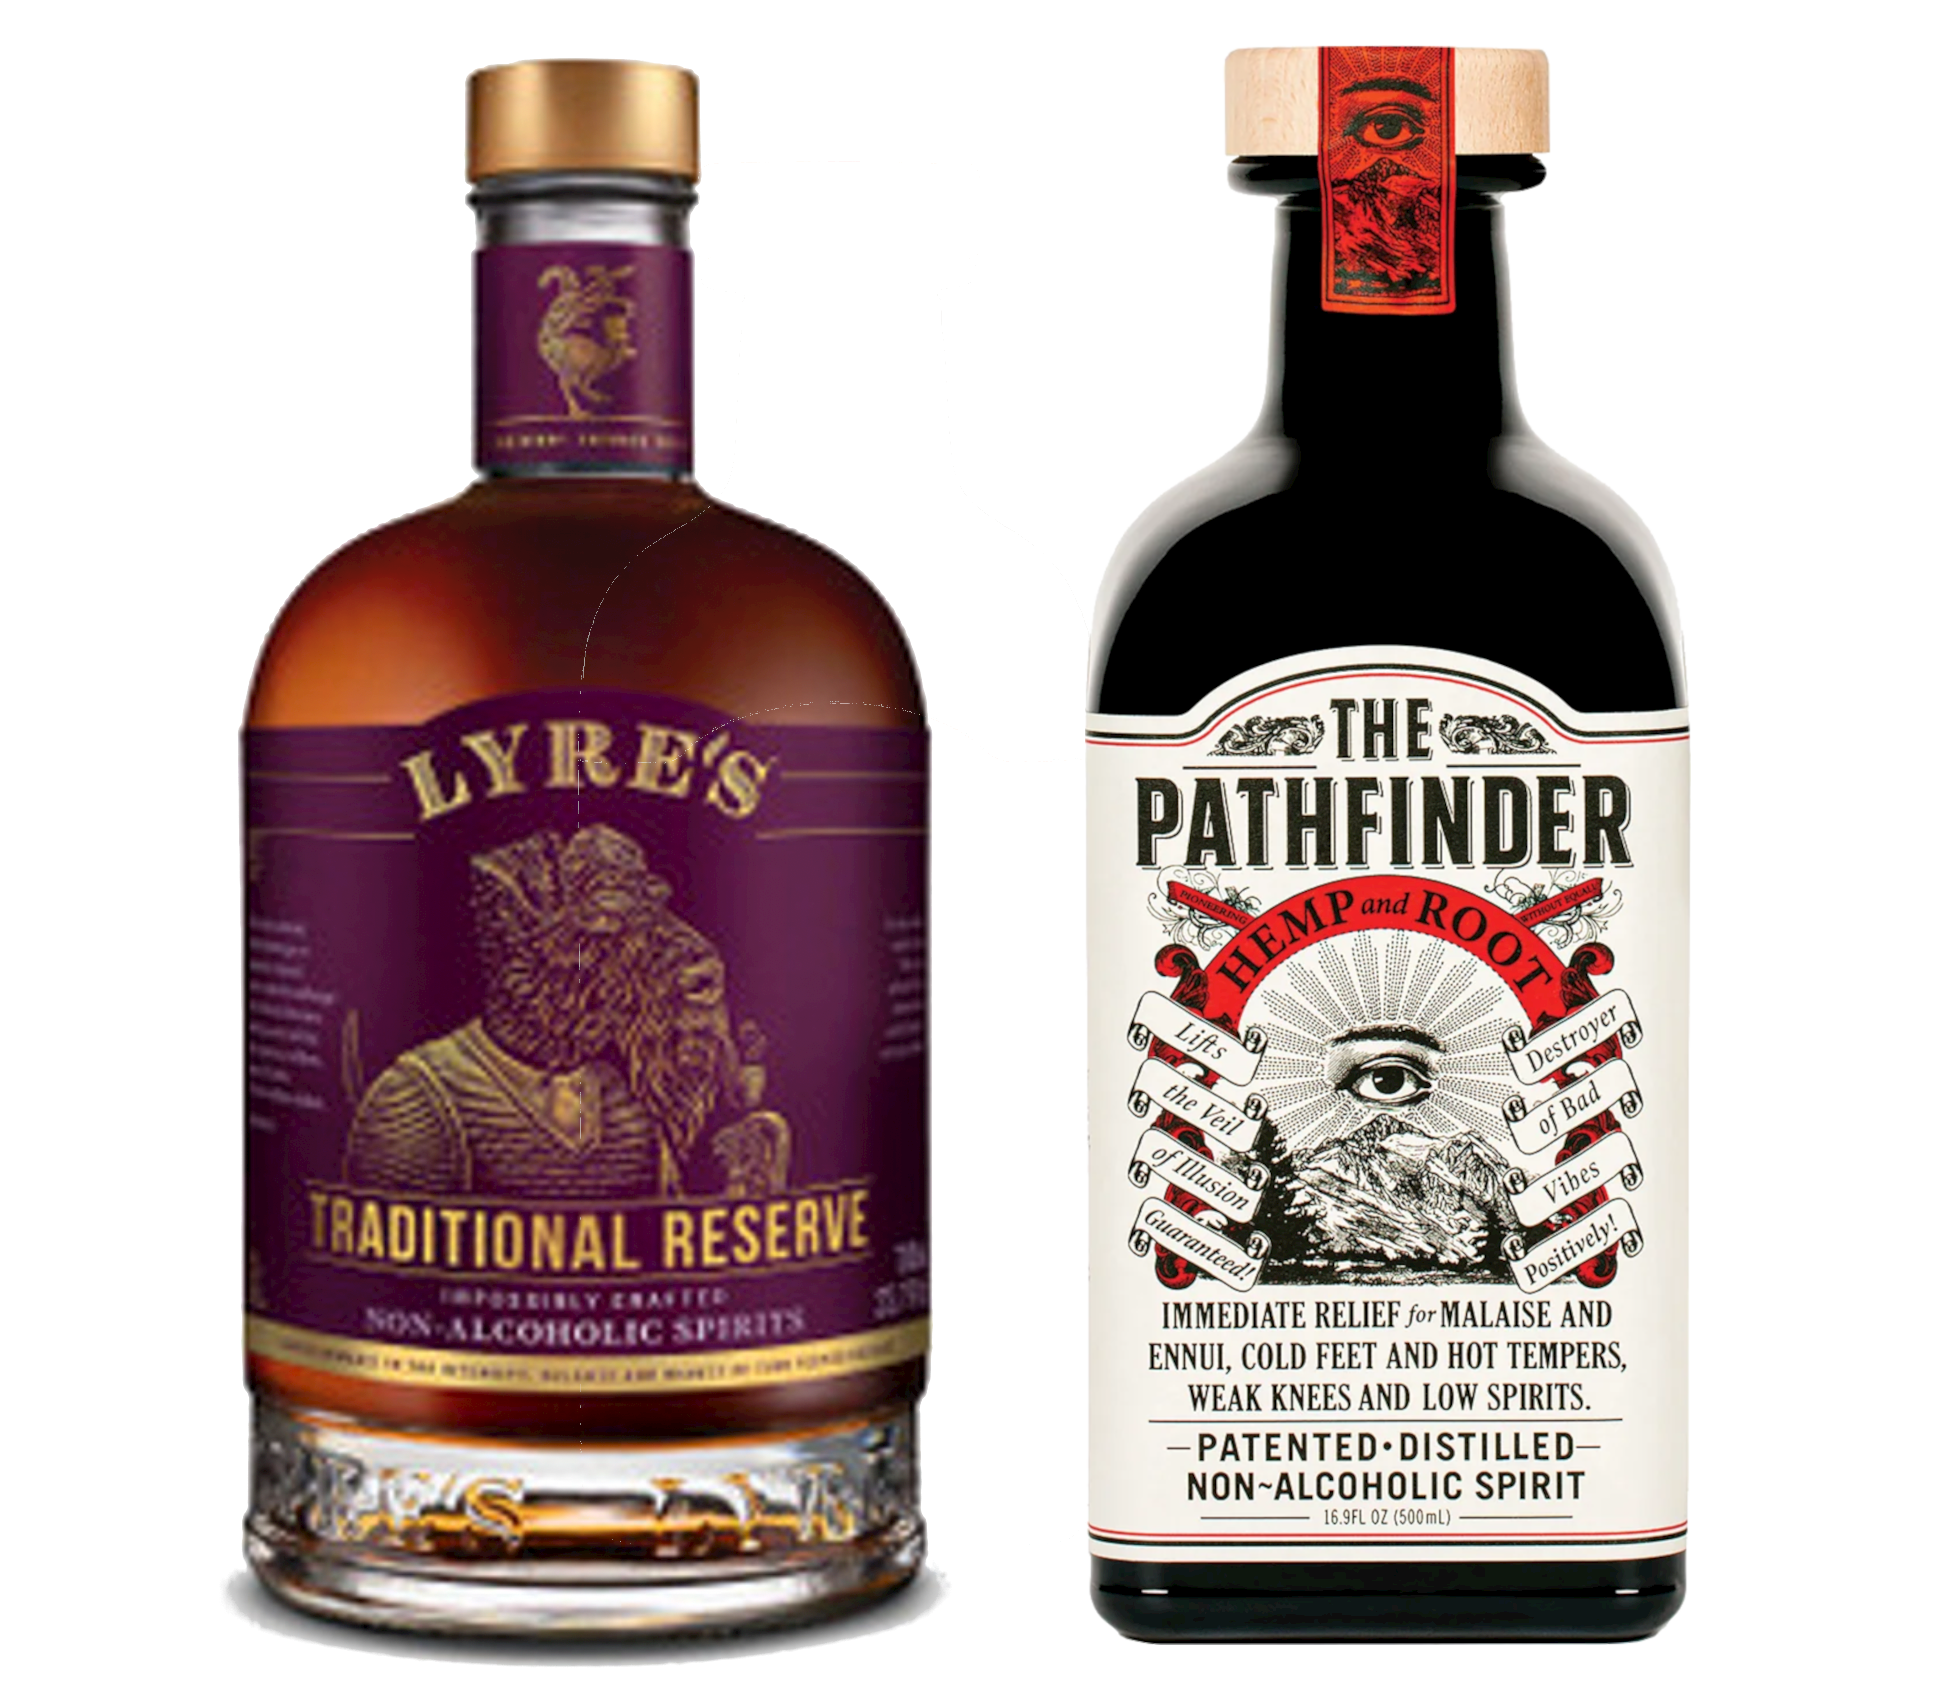 A bottle of The Pathfinder and a bottle of Lyre’s Traditional Reserve, formerly known as Highland Malt